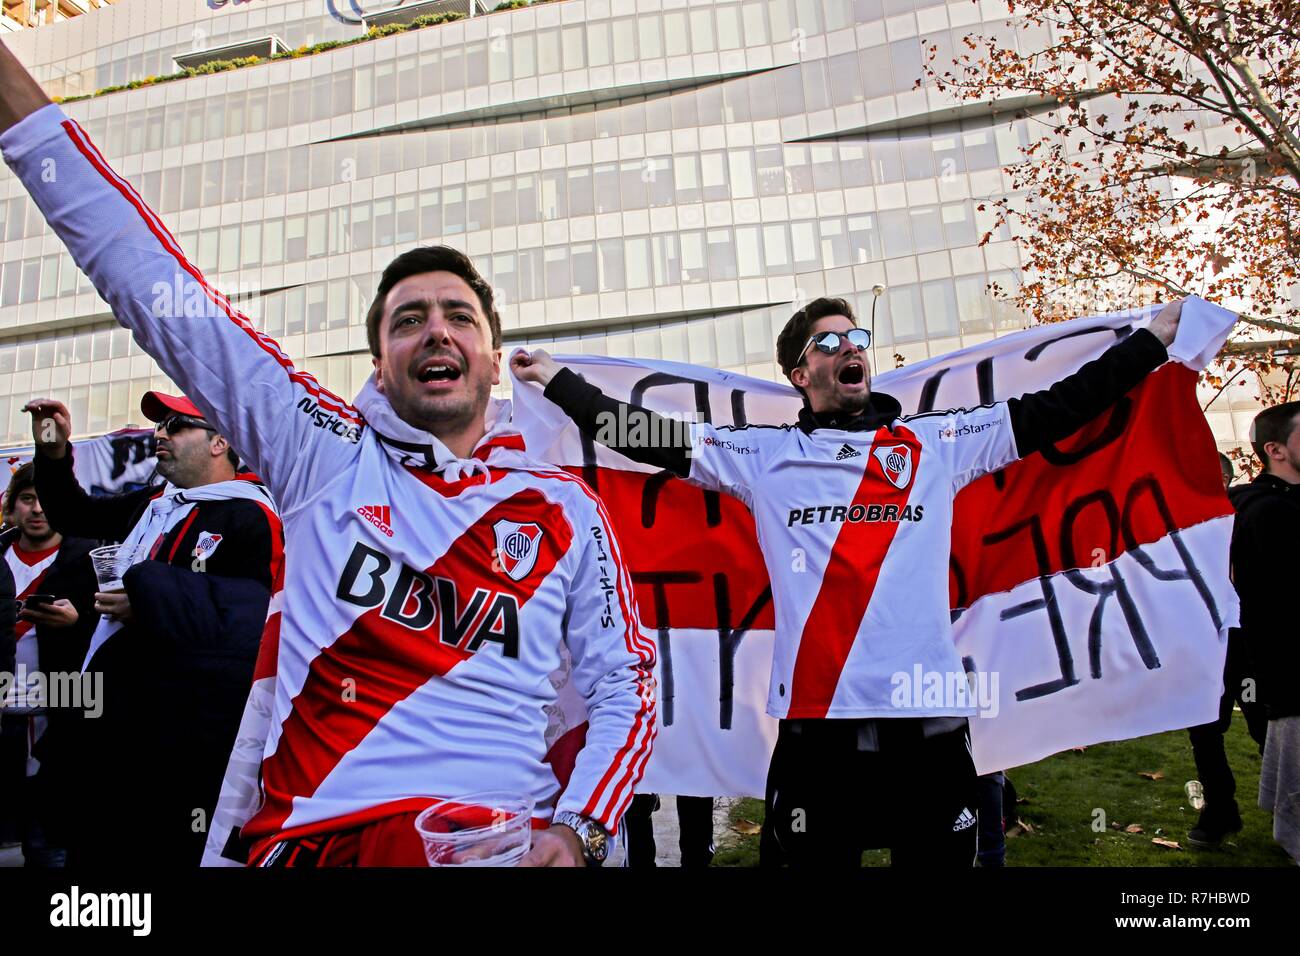 Madrid, Madrid, Spain. 9th Dec, 2018. River plate fans seen before the match outside the stadium.The Copa Libertadores Final match between River Plate and Boca Juniors is being played in Madrid. Credit: Mario Roldan/SOPA Images/ZUMA Wire/Alamy Live News Stock Photo